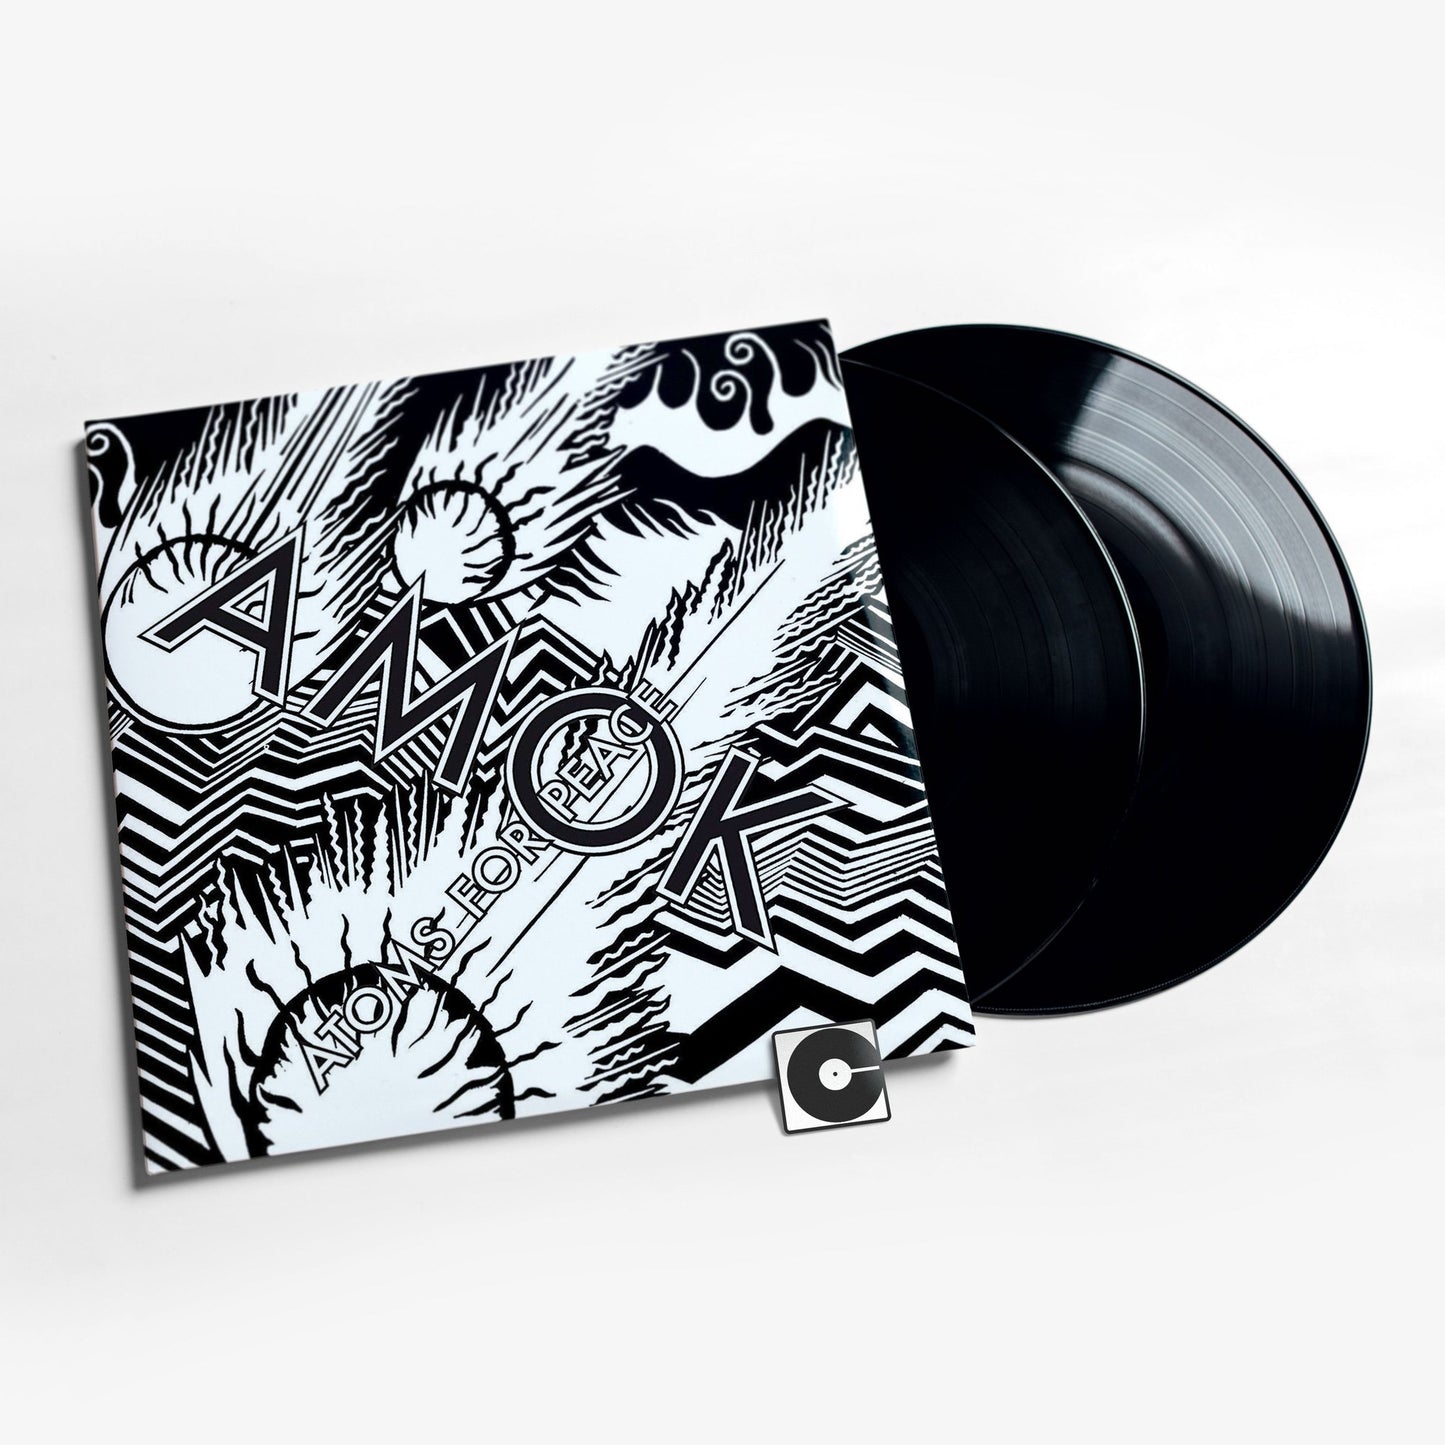 Atoms For Peace - "Amok"